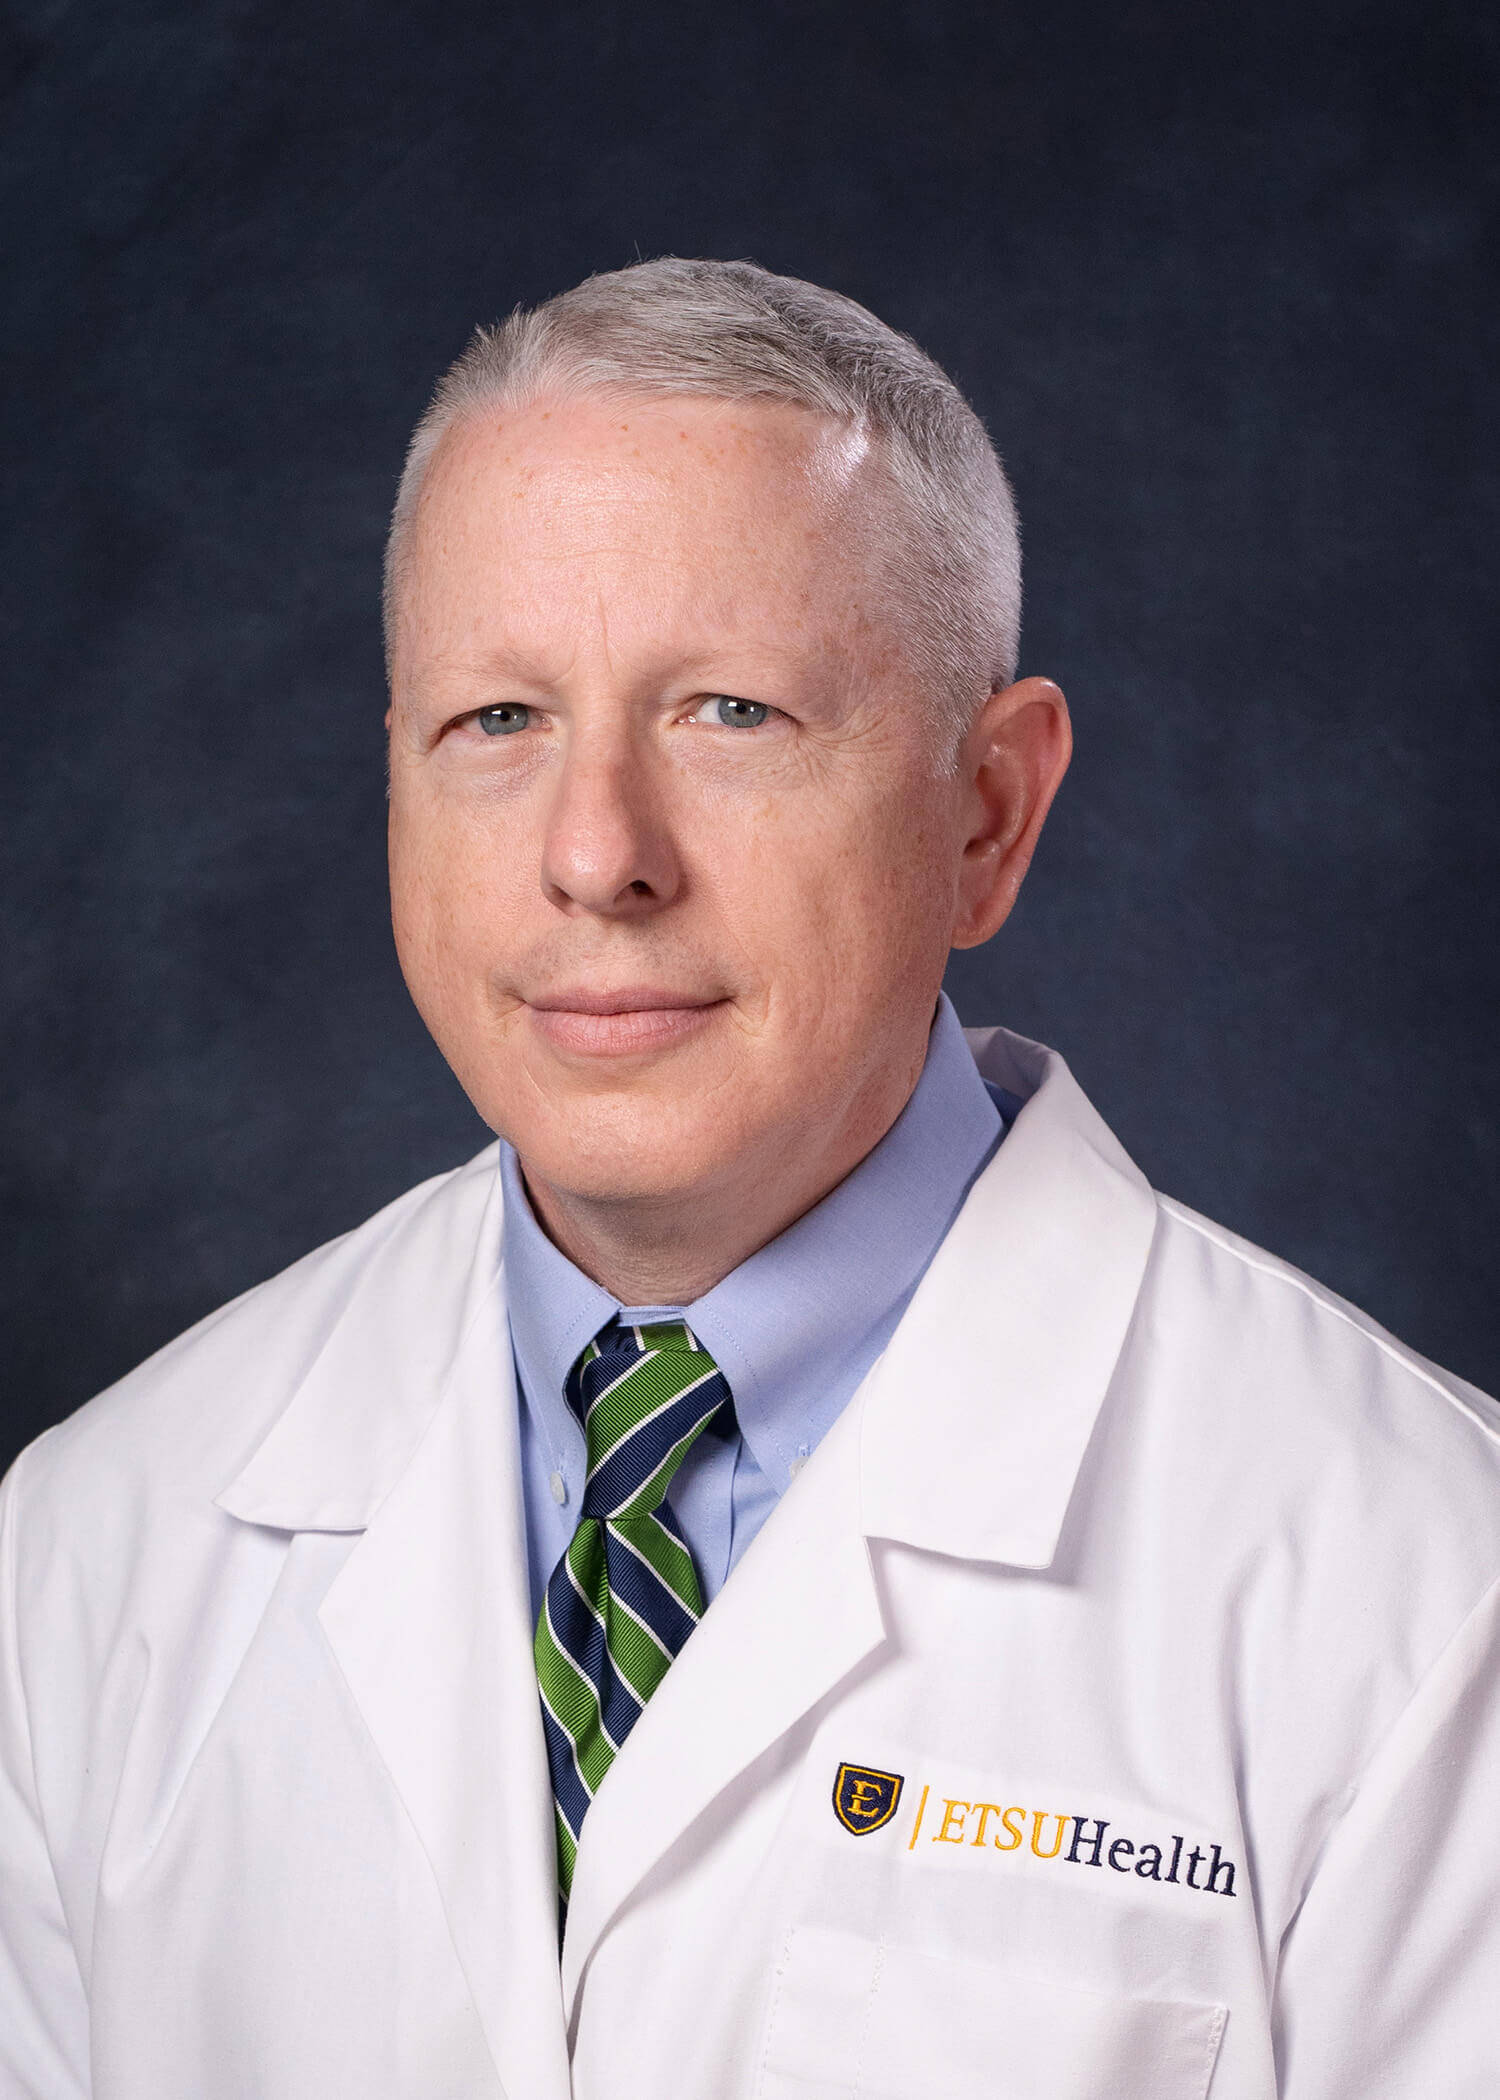 Photo of R. Keith Huffaker, MD, MBA, FACOG, FPMRS